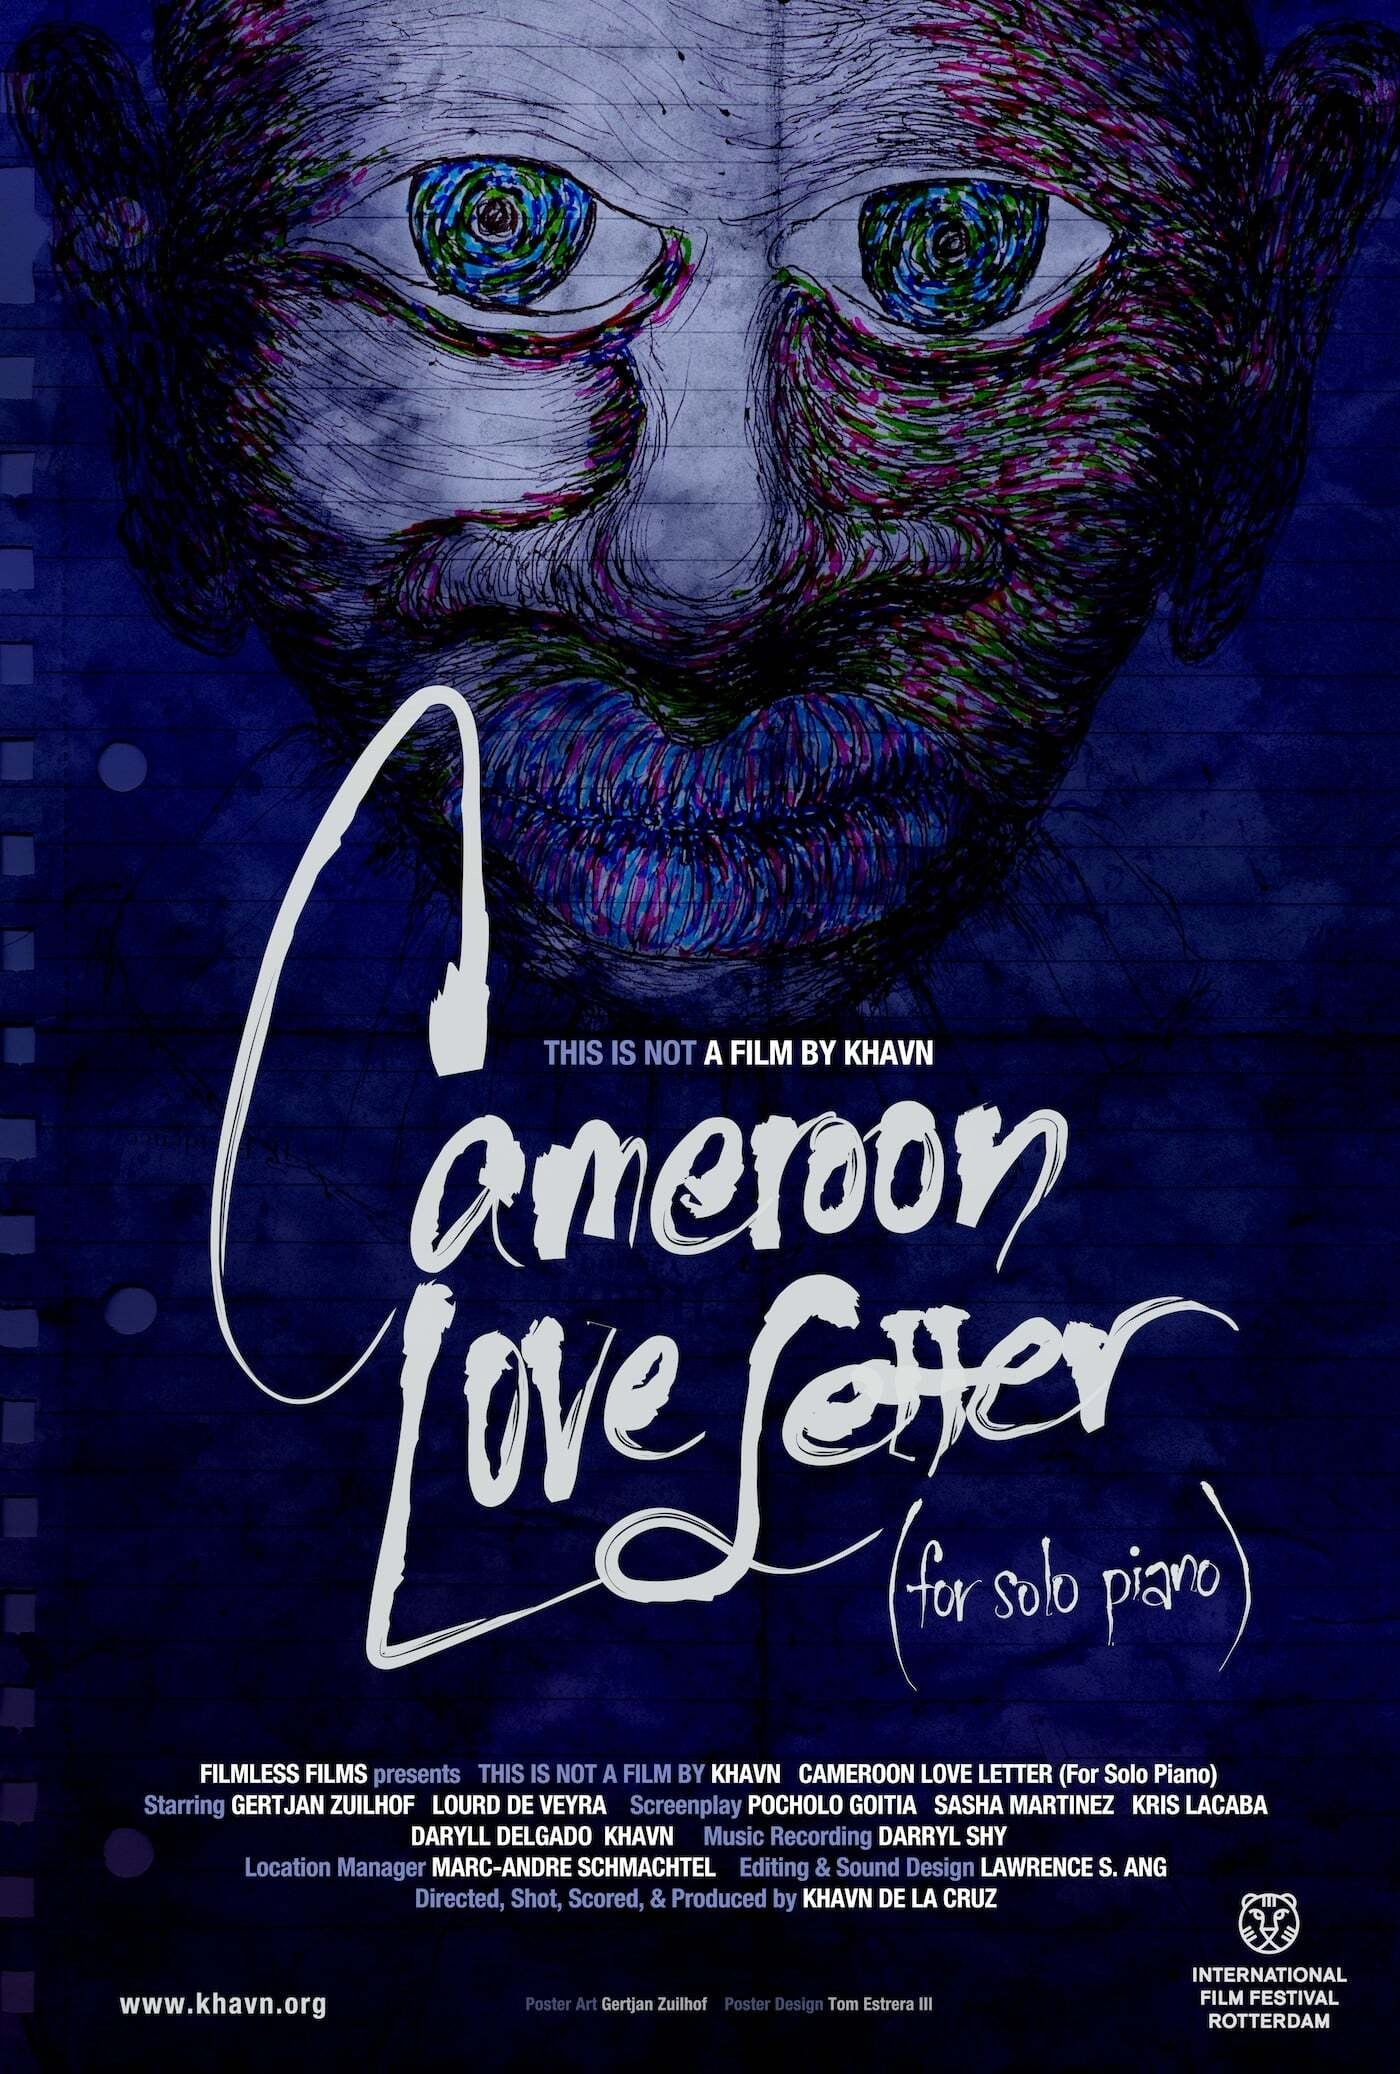 Cameroon Love Letter (For Solo Piano)